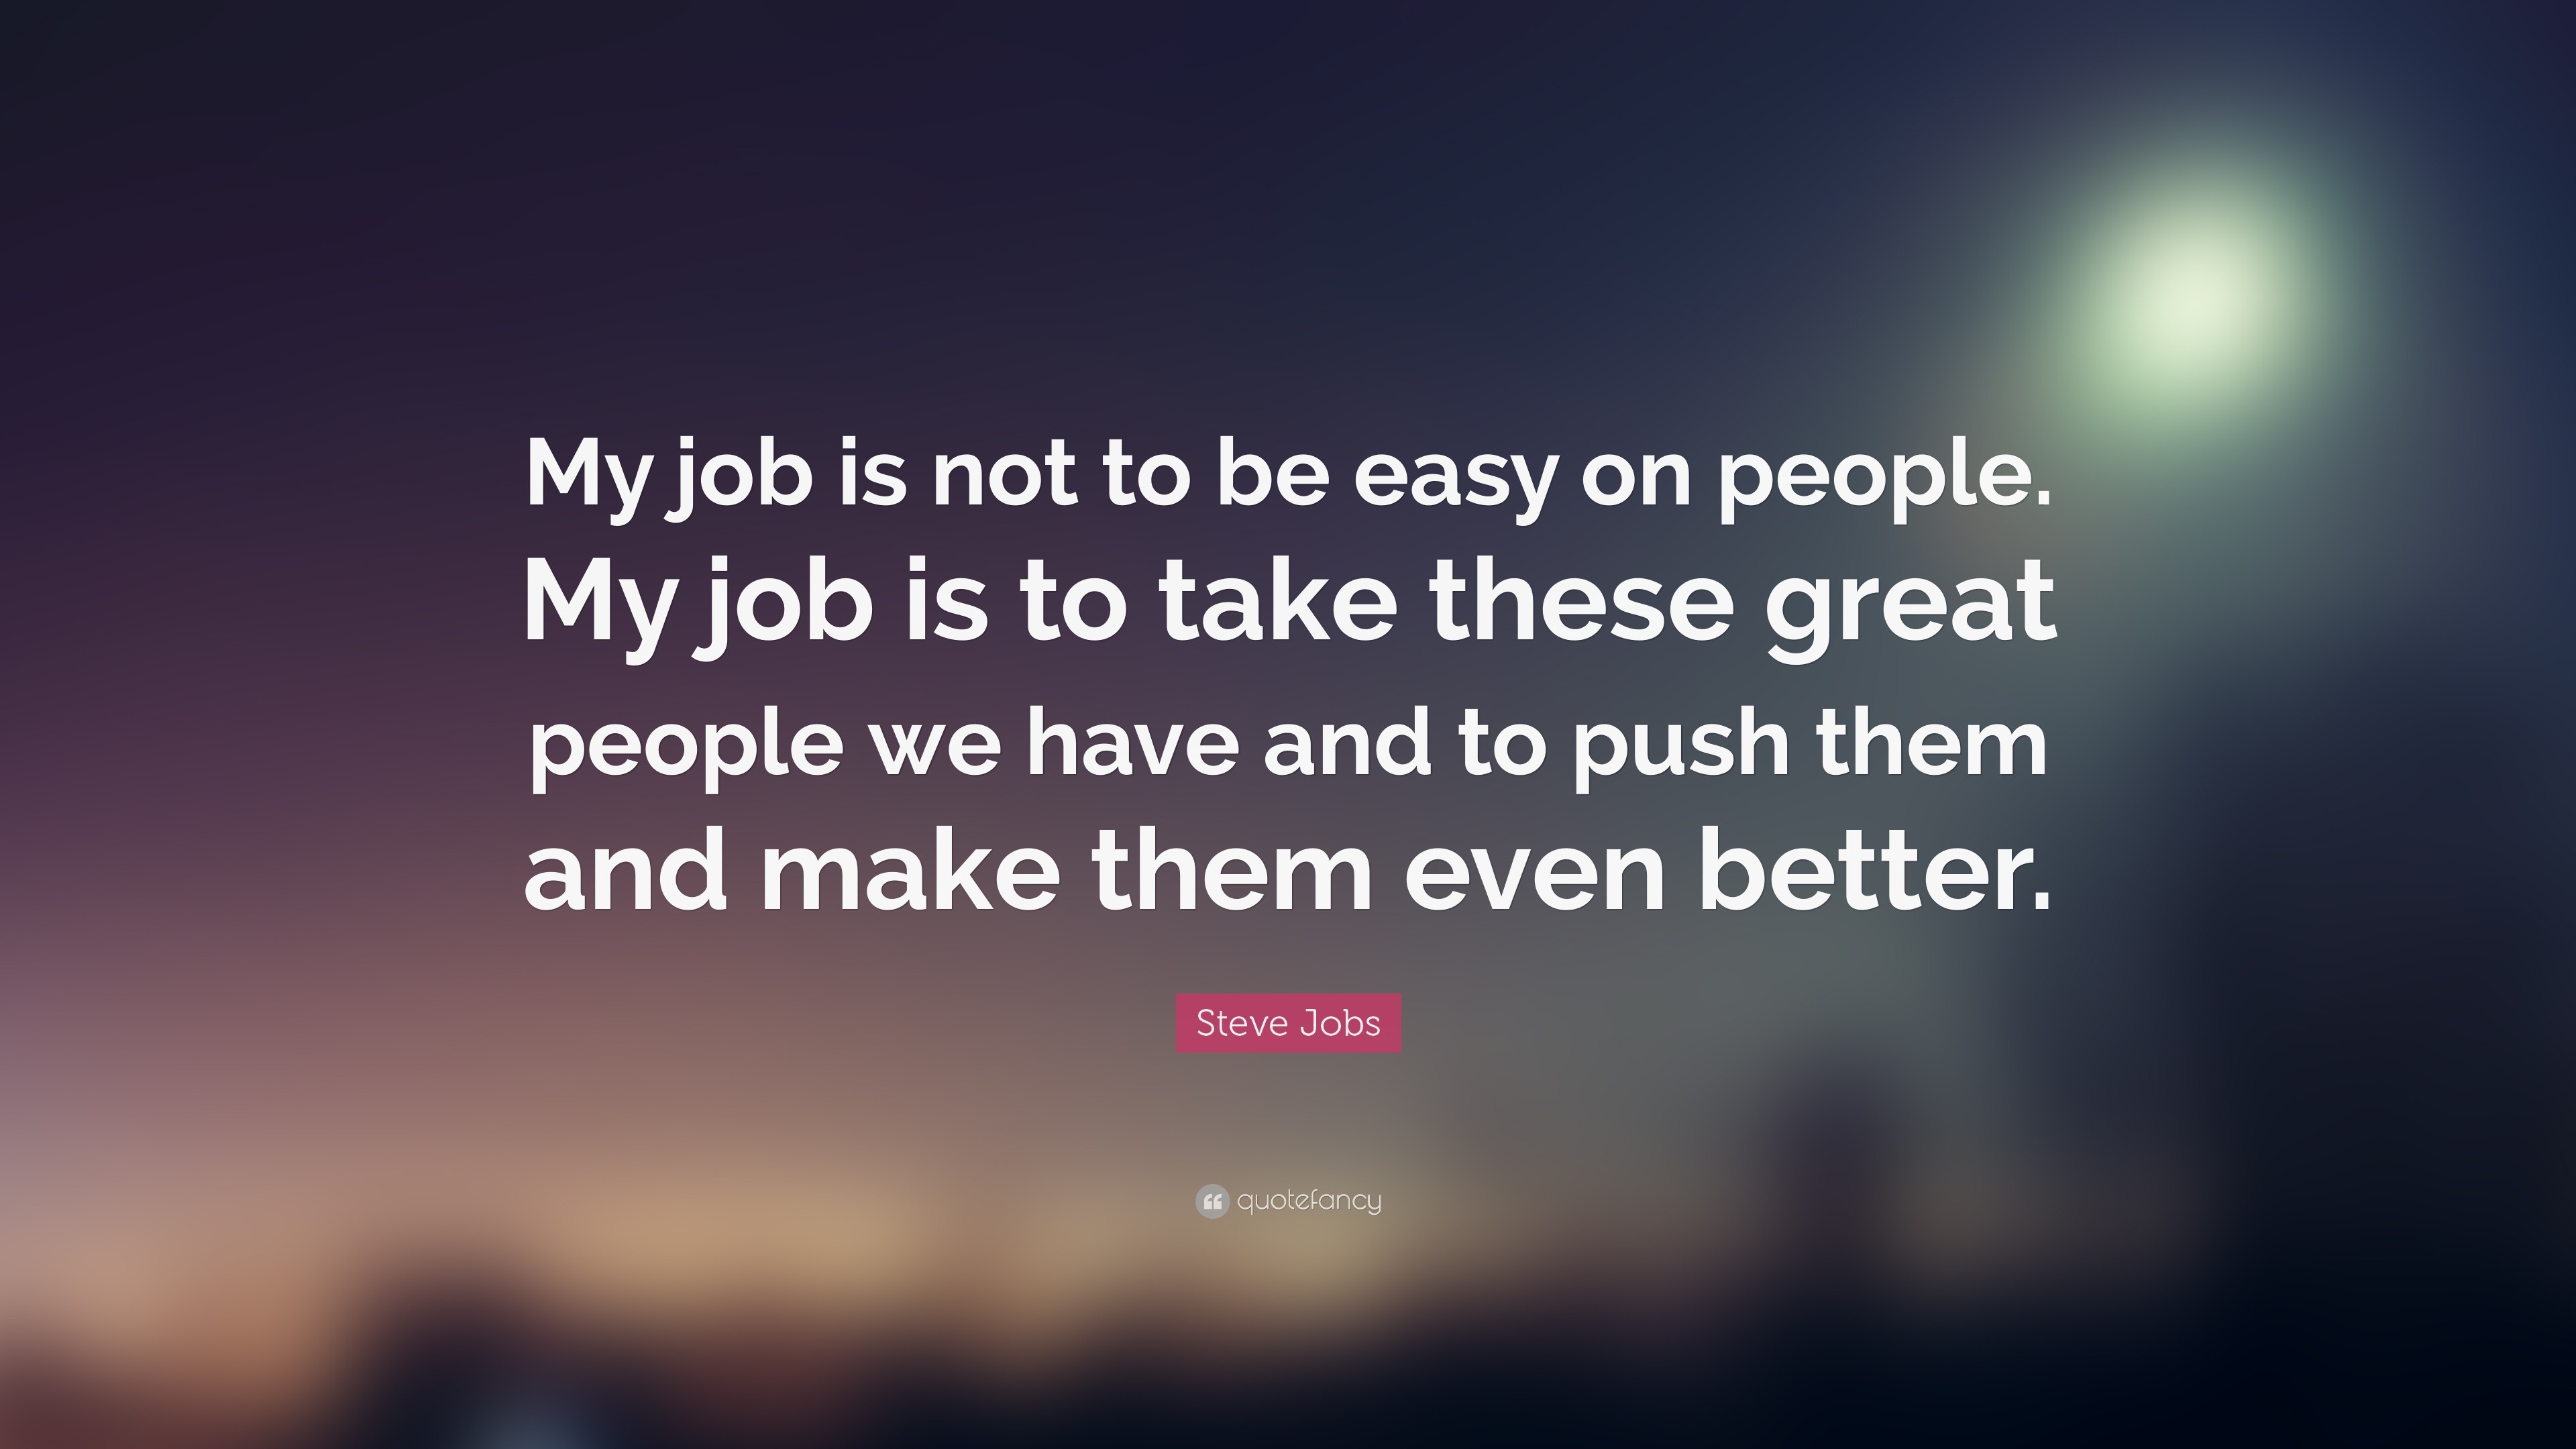 Steve Jobs Quote: “My job is not to be easy on people. My job is to